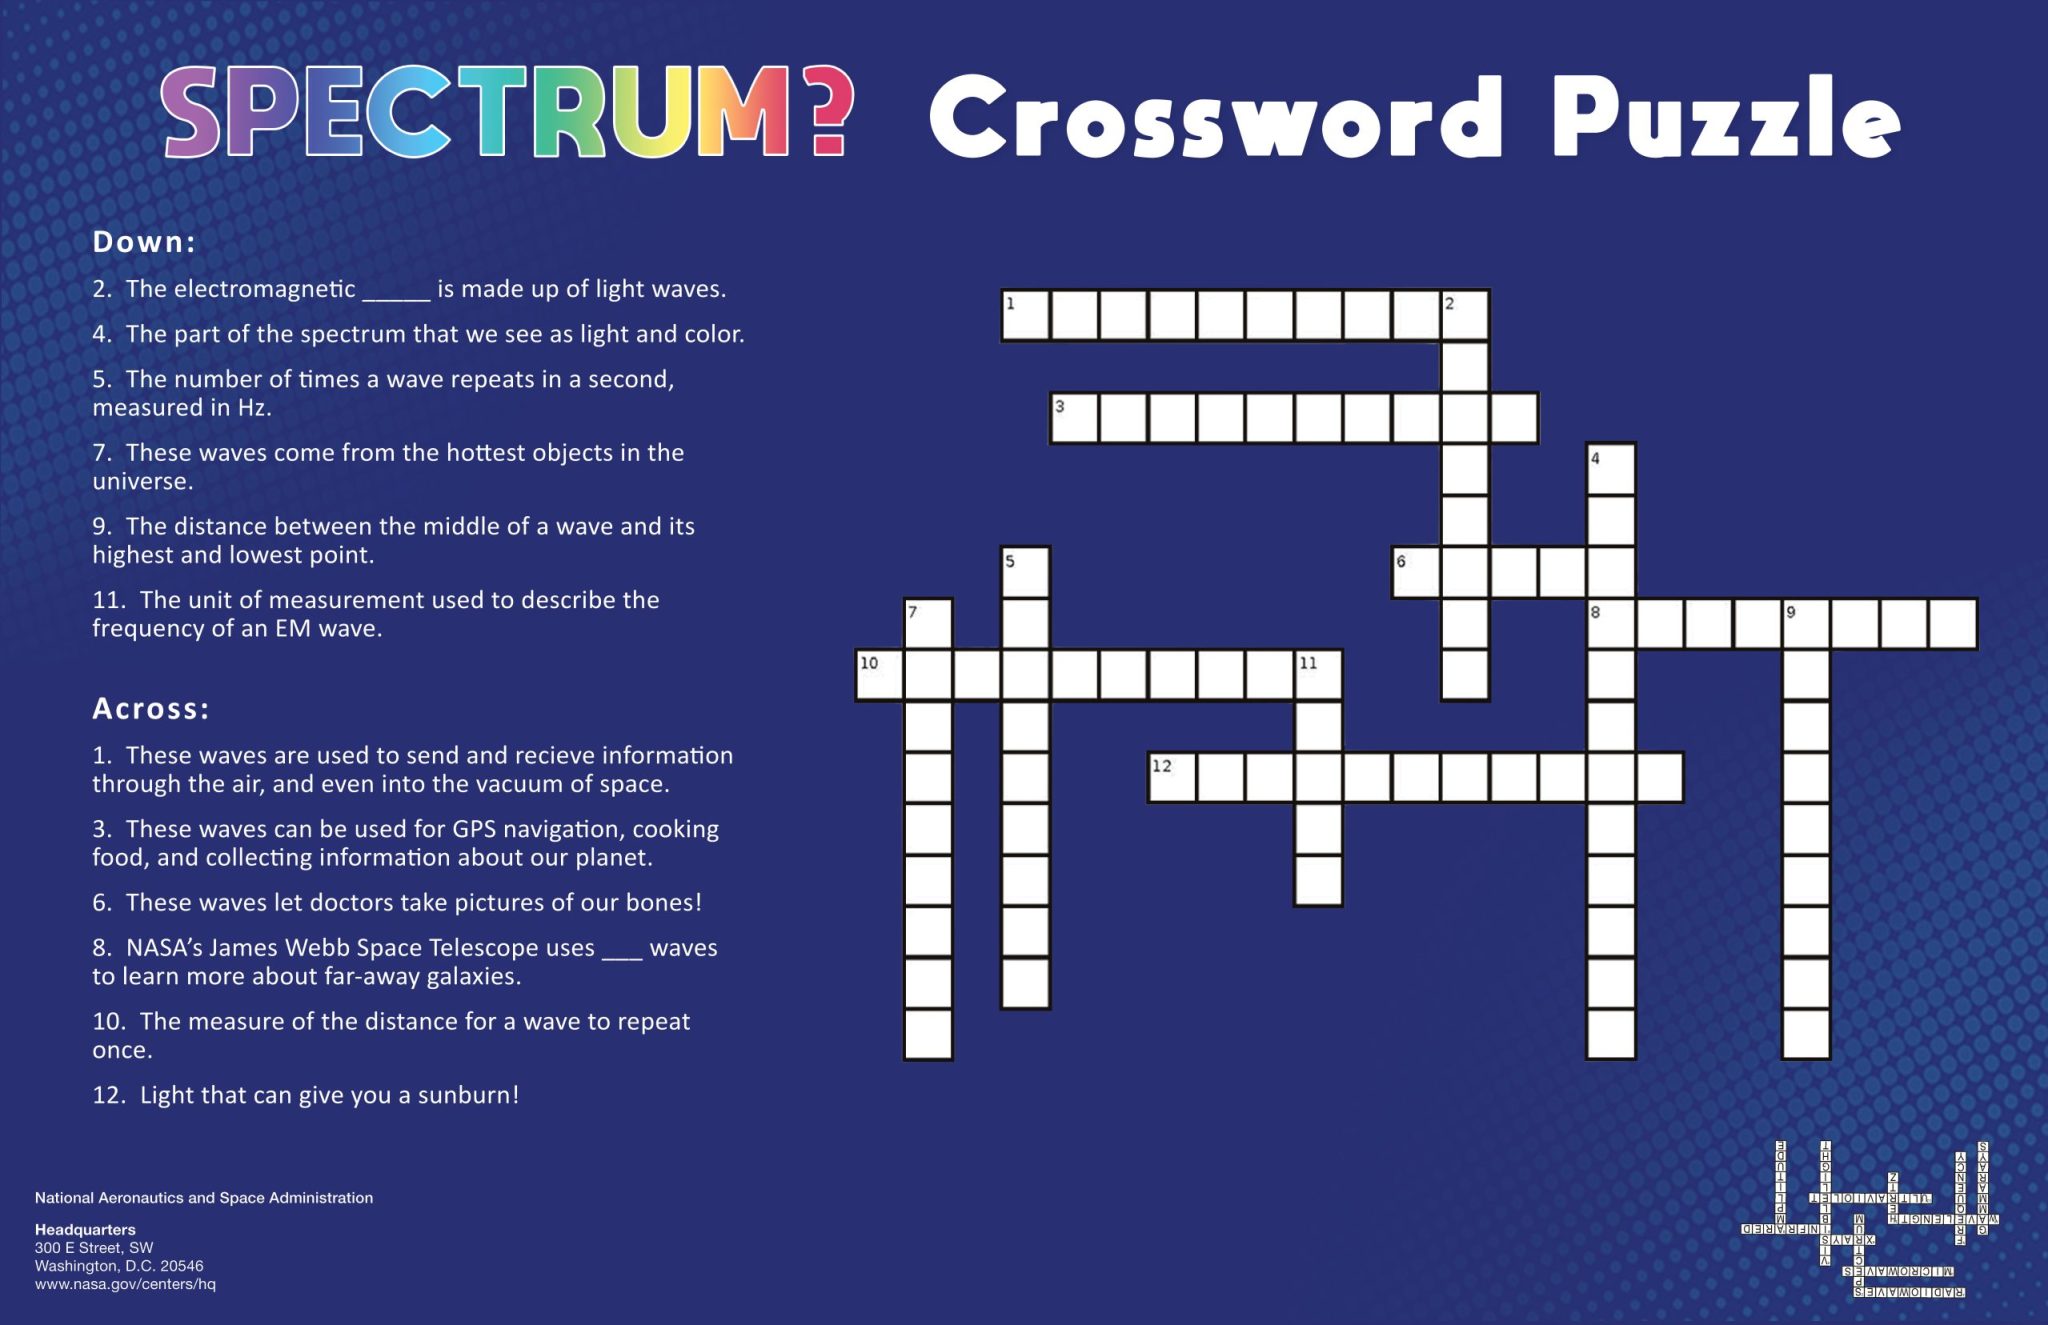 Crossword puzzle featuring terms relevant to the electromagnetic spectrum.